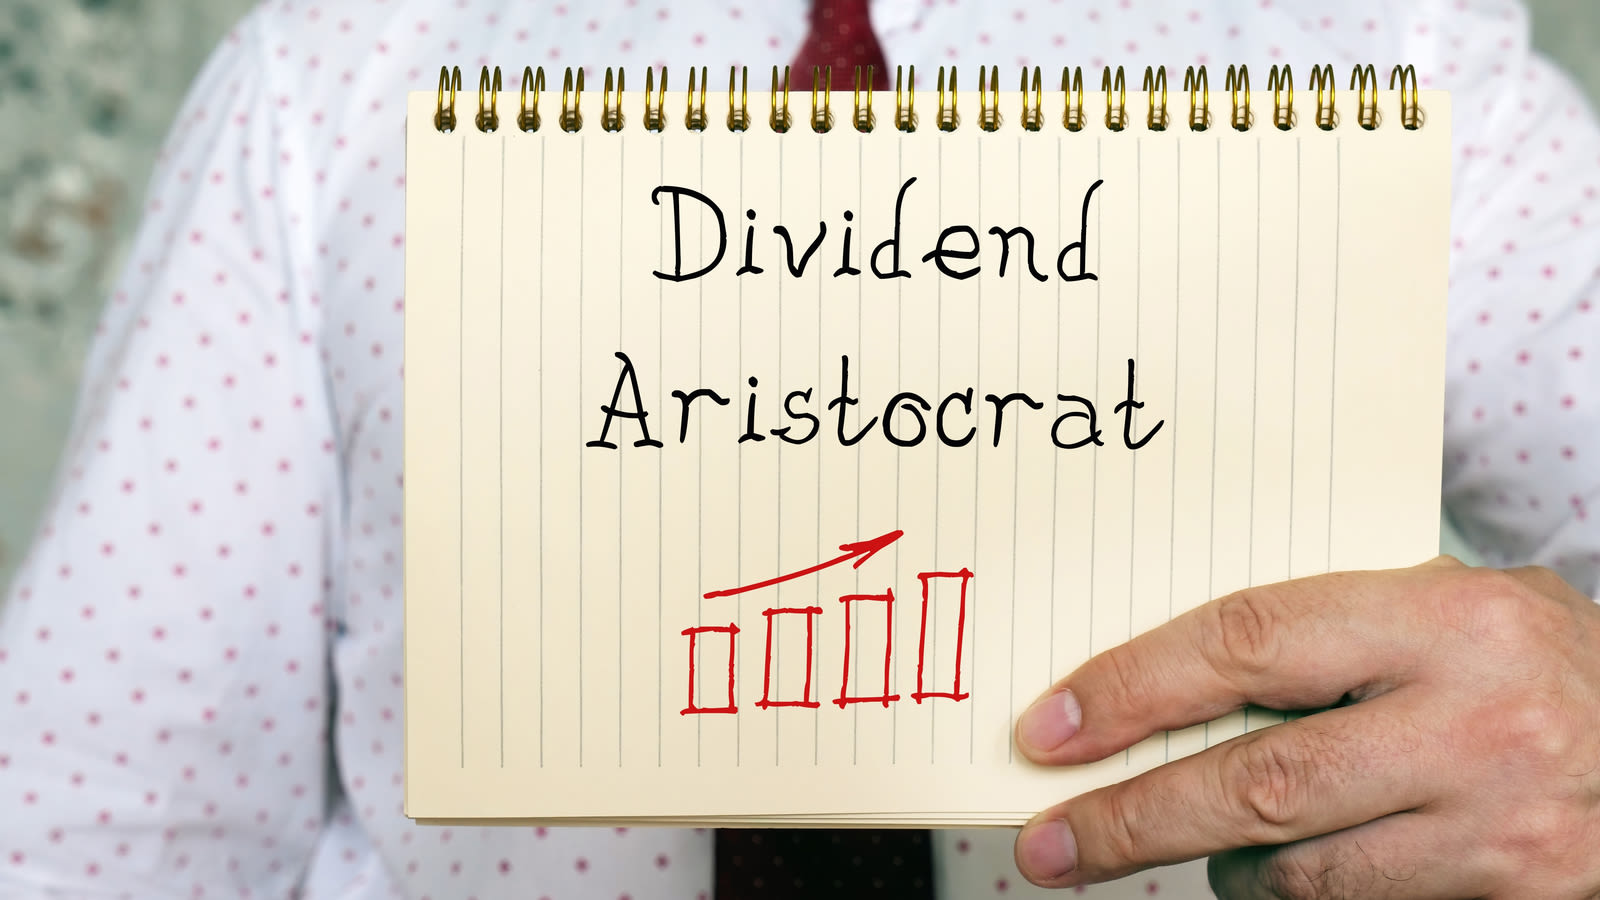 Inflation-Proof Fortunes: 7 Dividend Aristocrats to Keep Your Wealth Growing